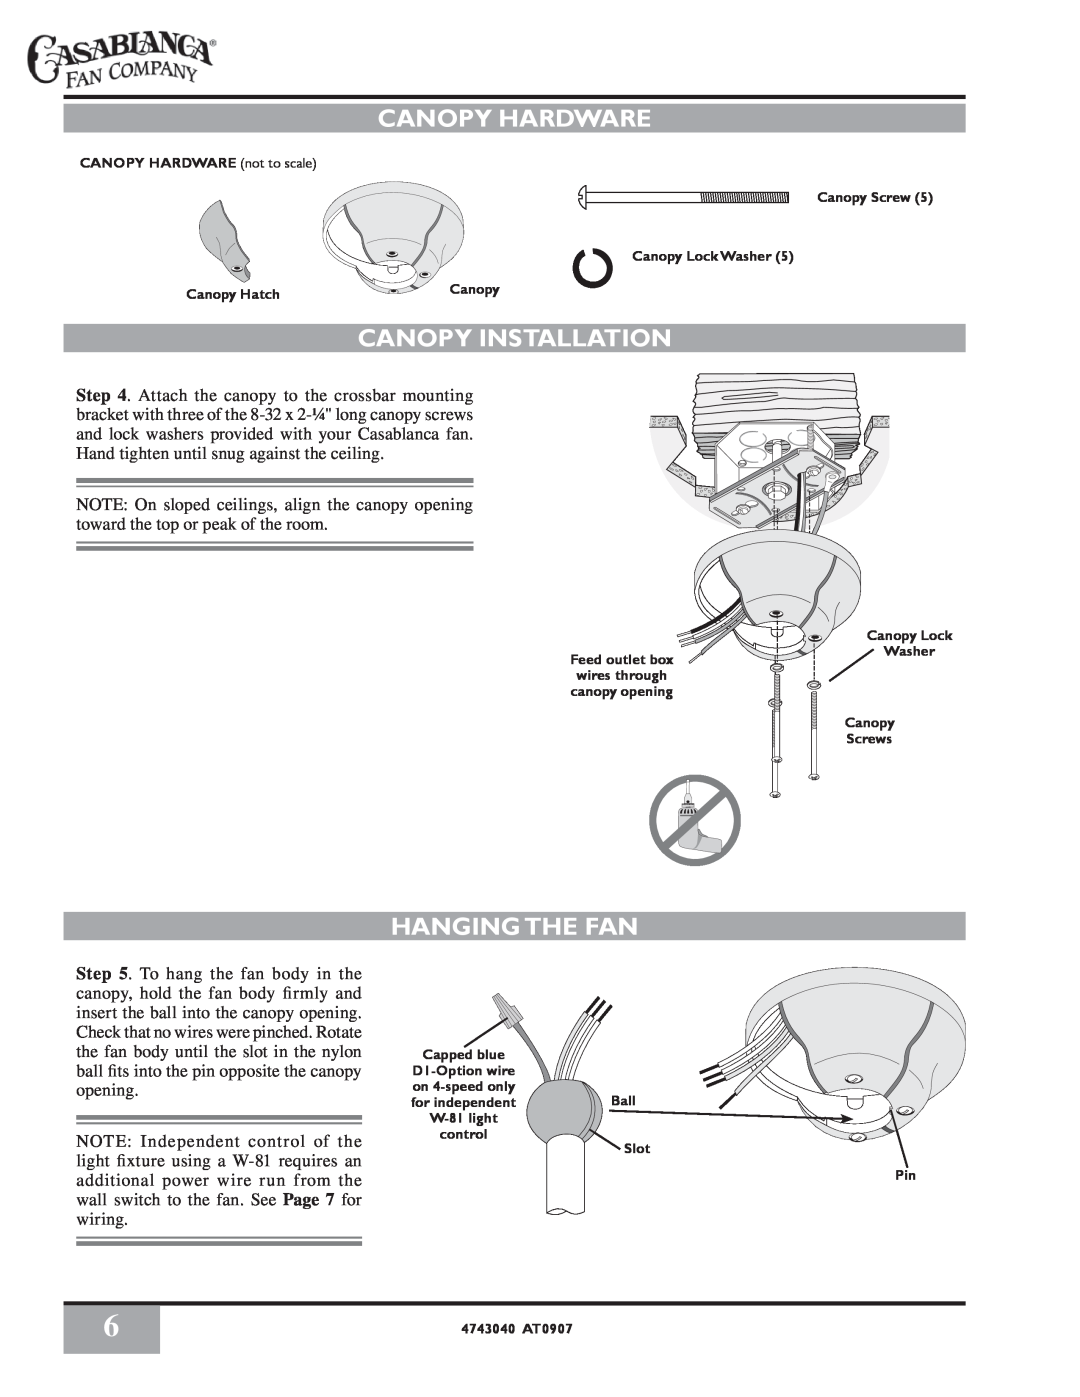 Casablanca Fan Company 4726D owner manual Canopy Hardware, Canopy Installation, Hanging The Fan, Canopy Lock Washer 